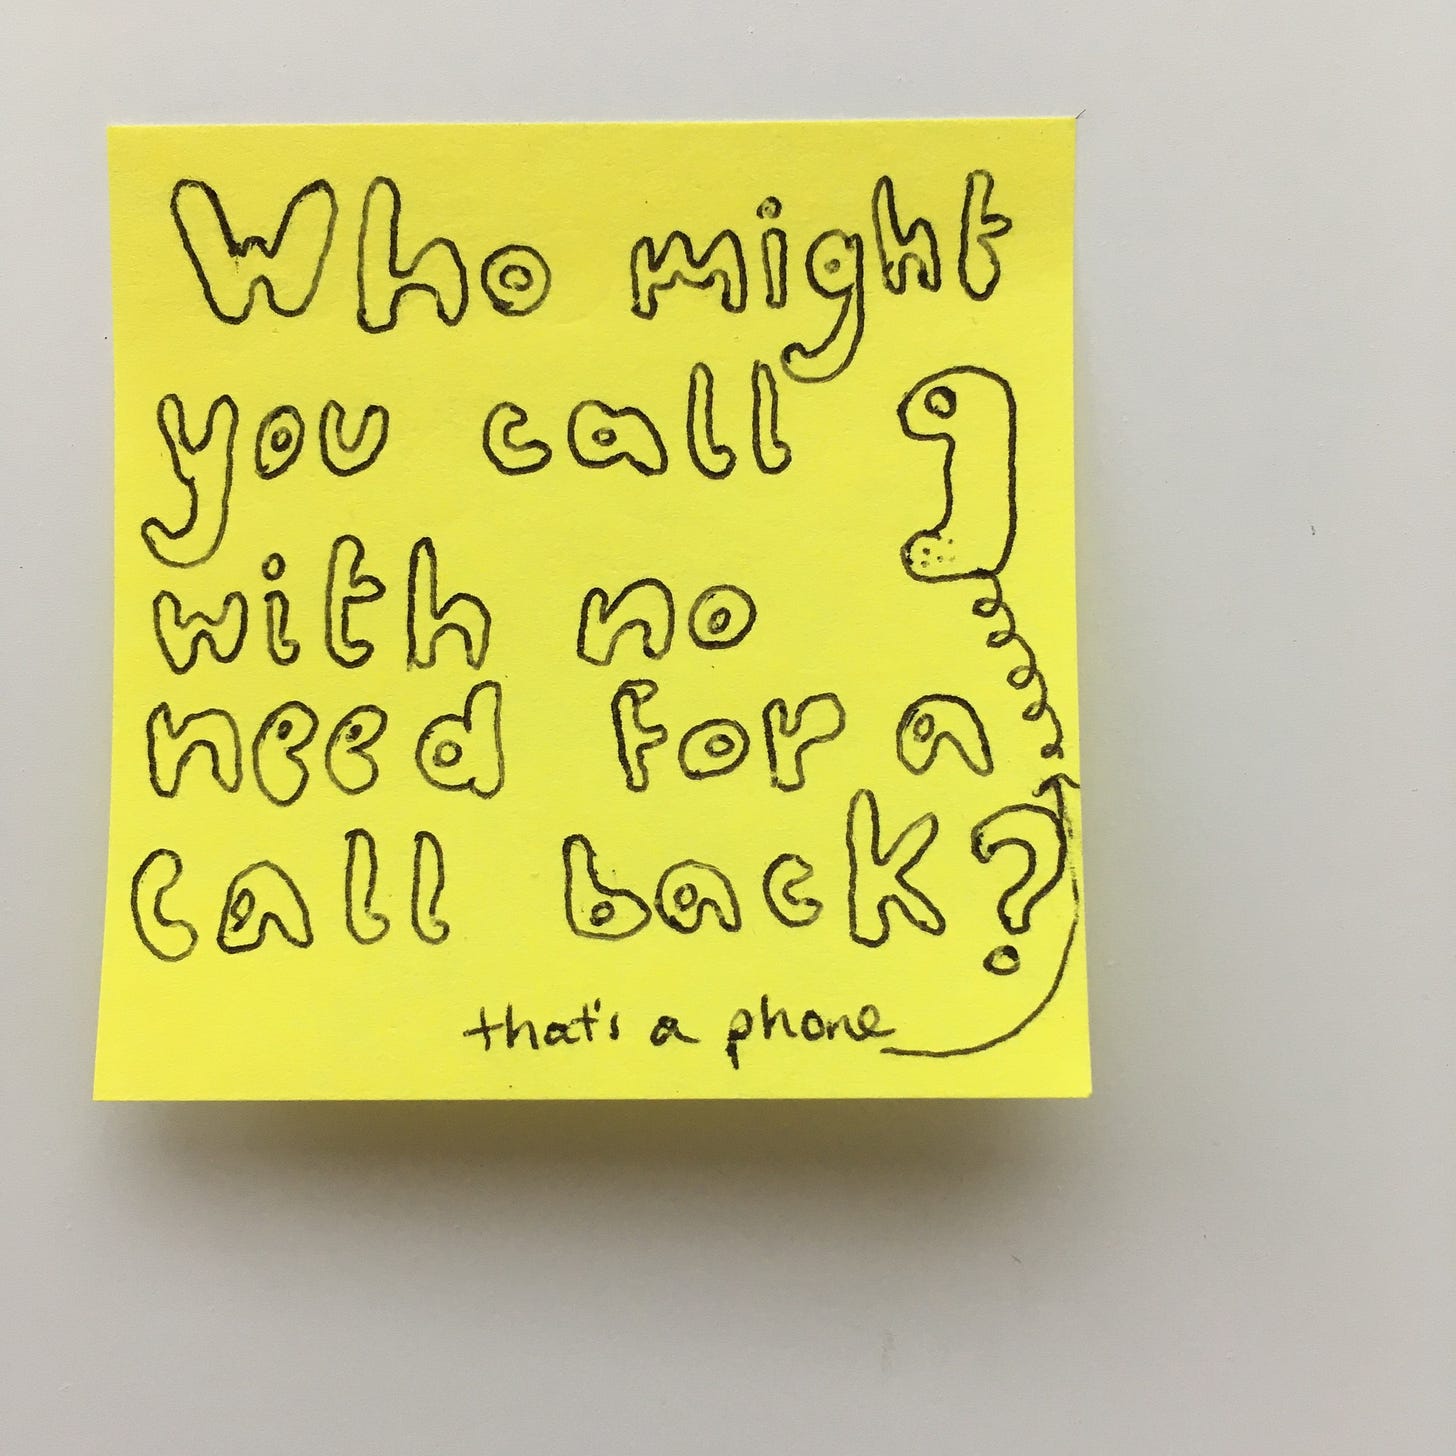 yellow square sticky note afixed to white background that reads, in handwritten bubble letters: "Who might you call with no need for a call back?" a phone is drawn on and then a line with an arrow to it with the words: "that's a phone" written